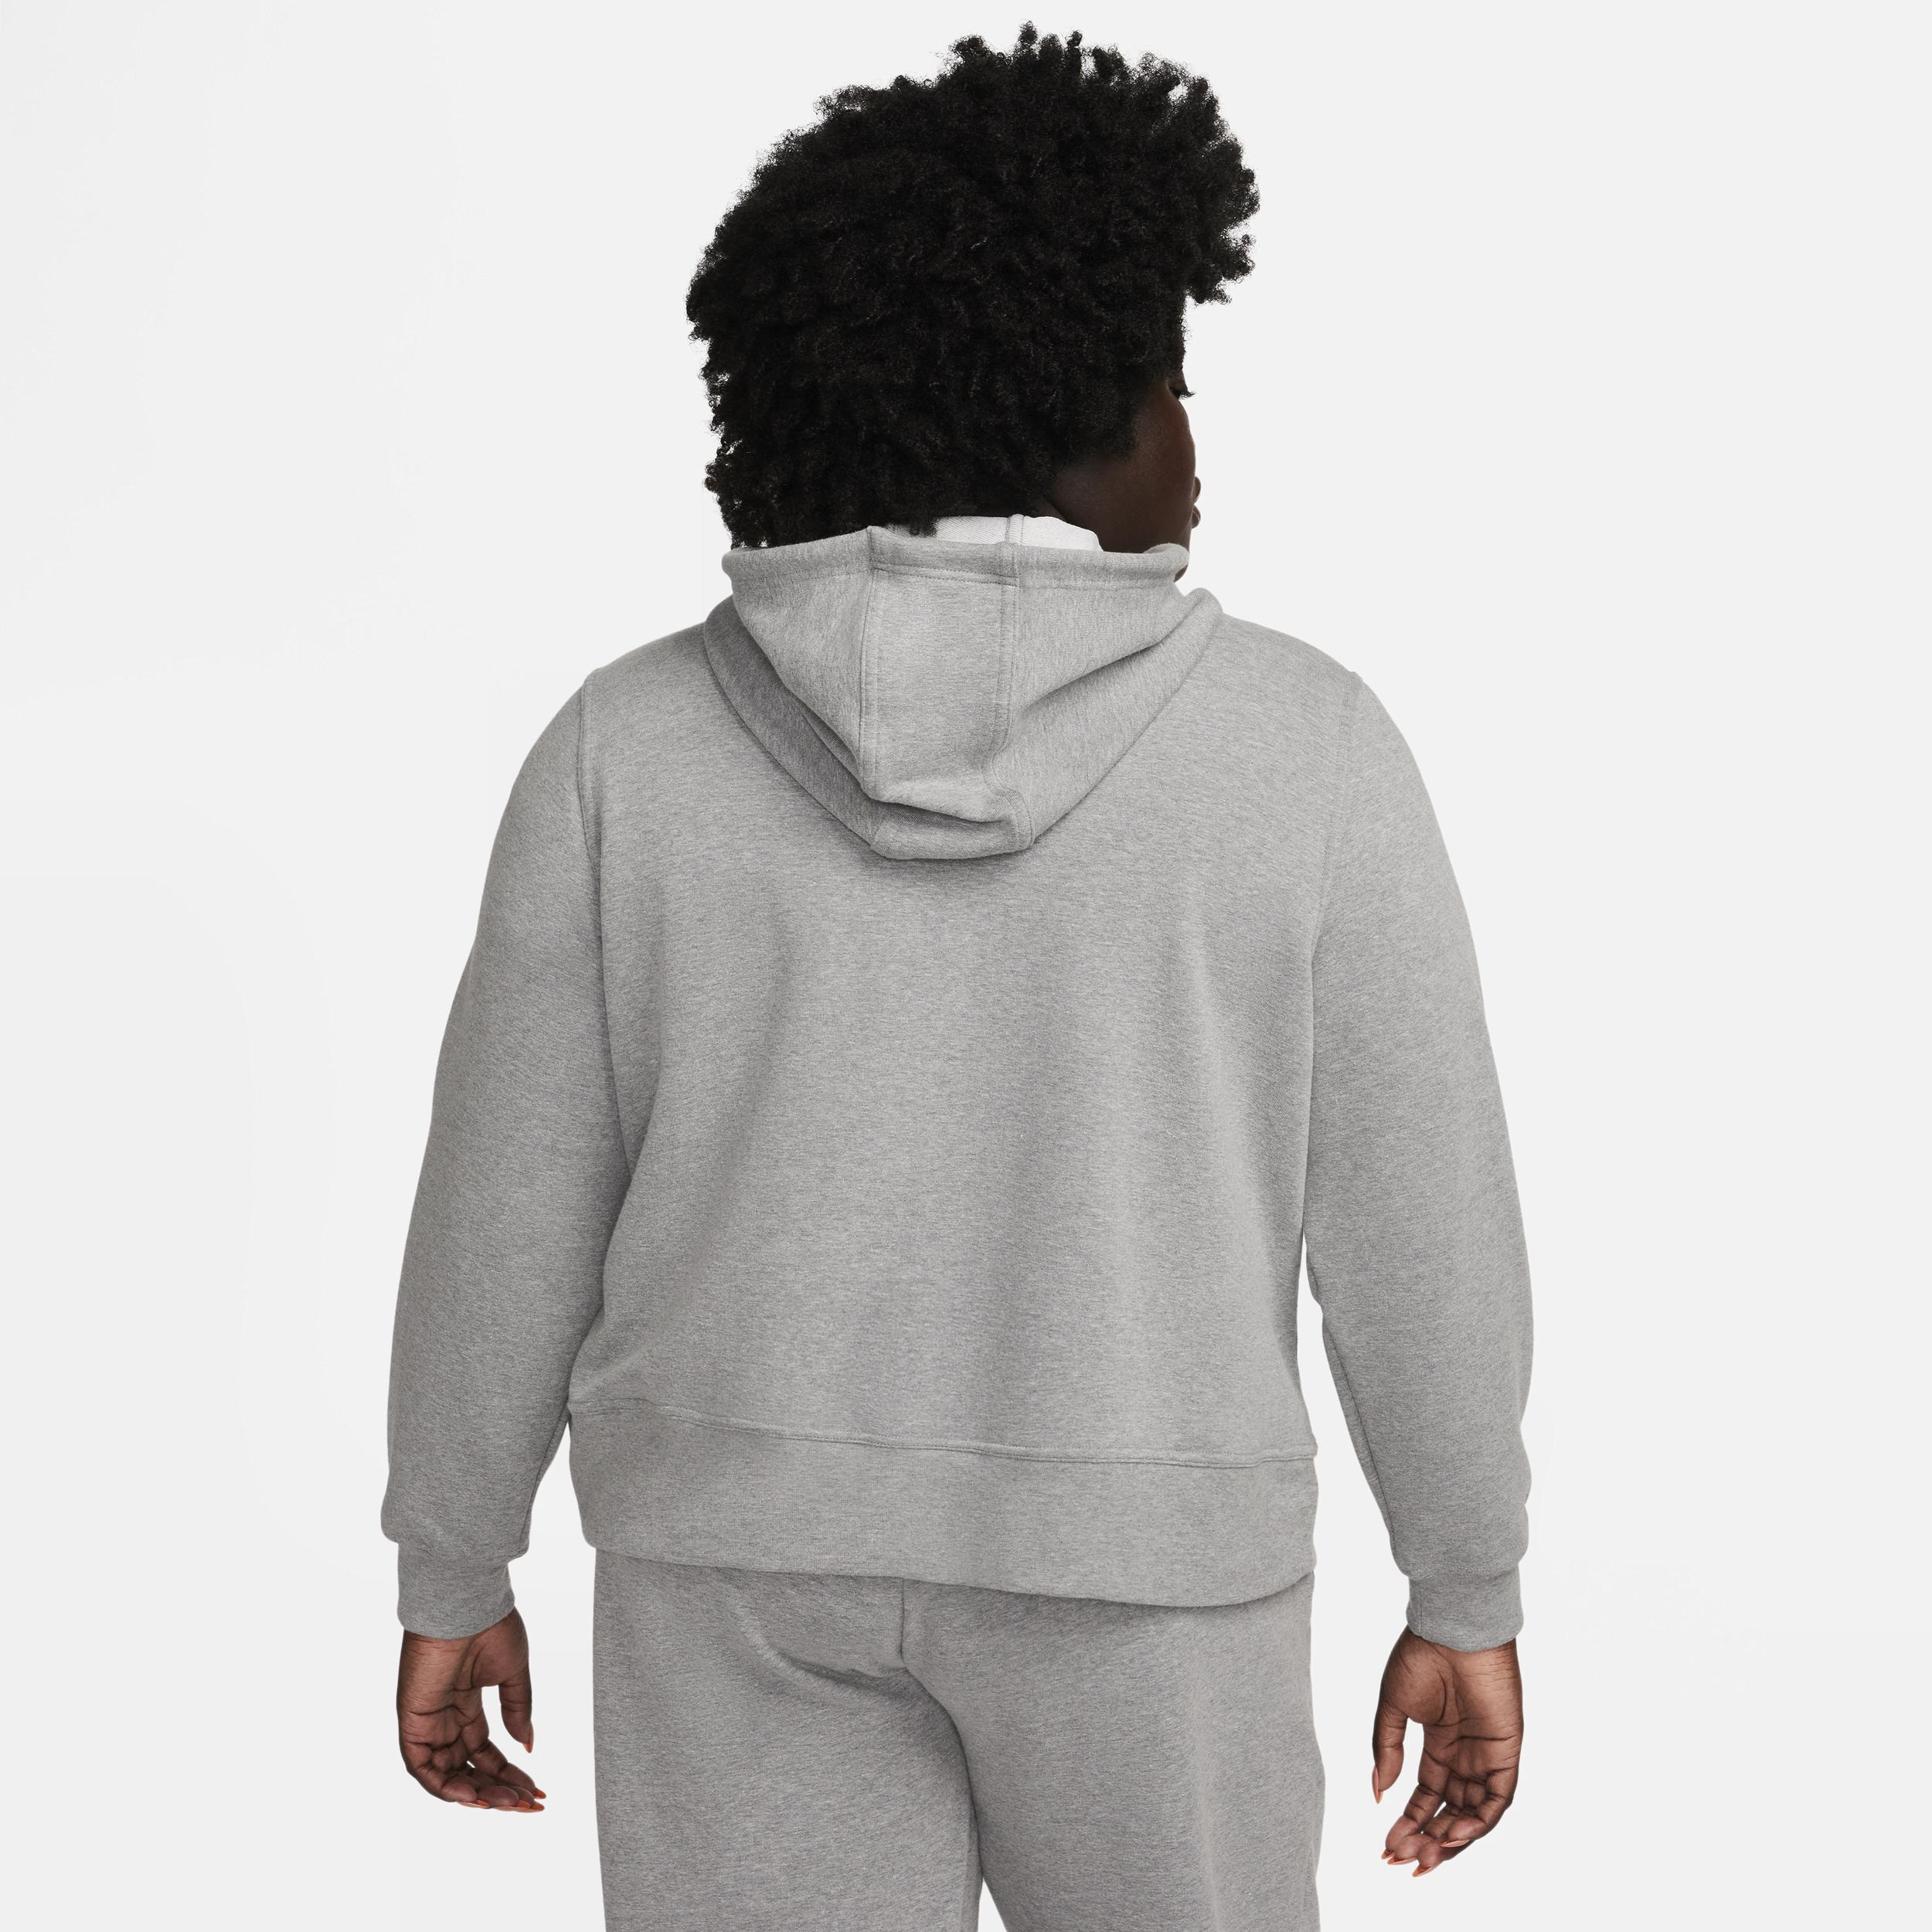 Nike Women's Dri-FIT One Full-Zip French Terry Hoodie (Plus Size) Product Image